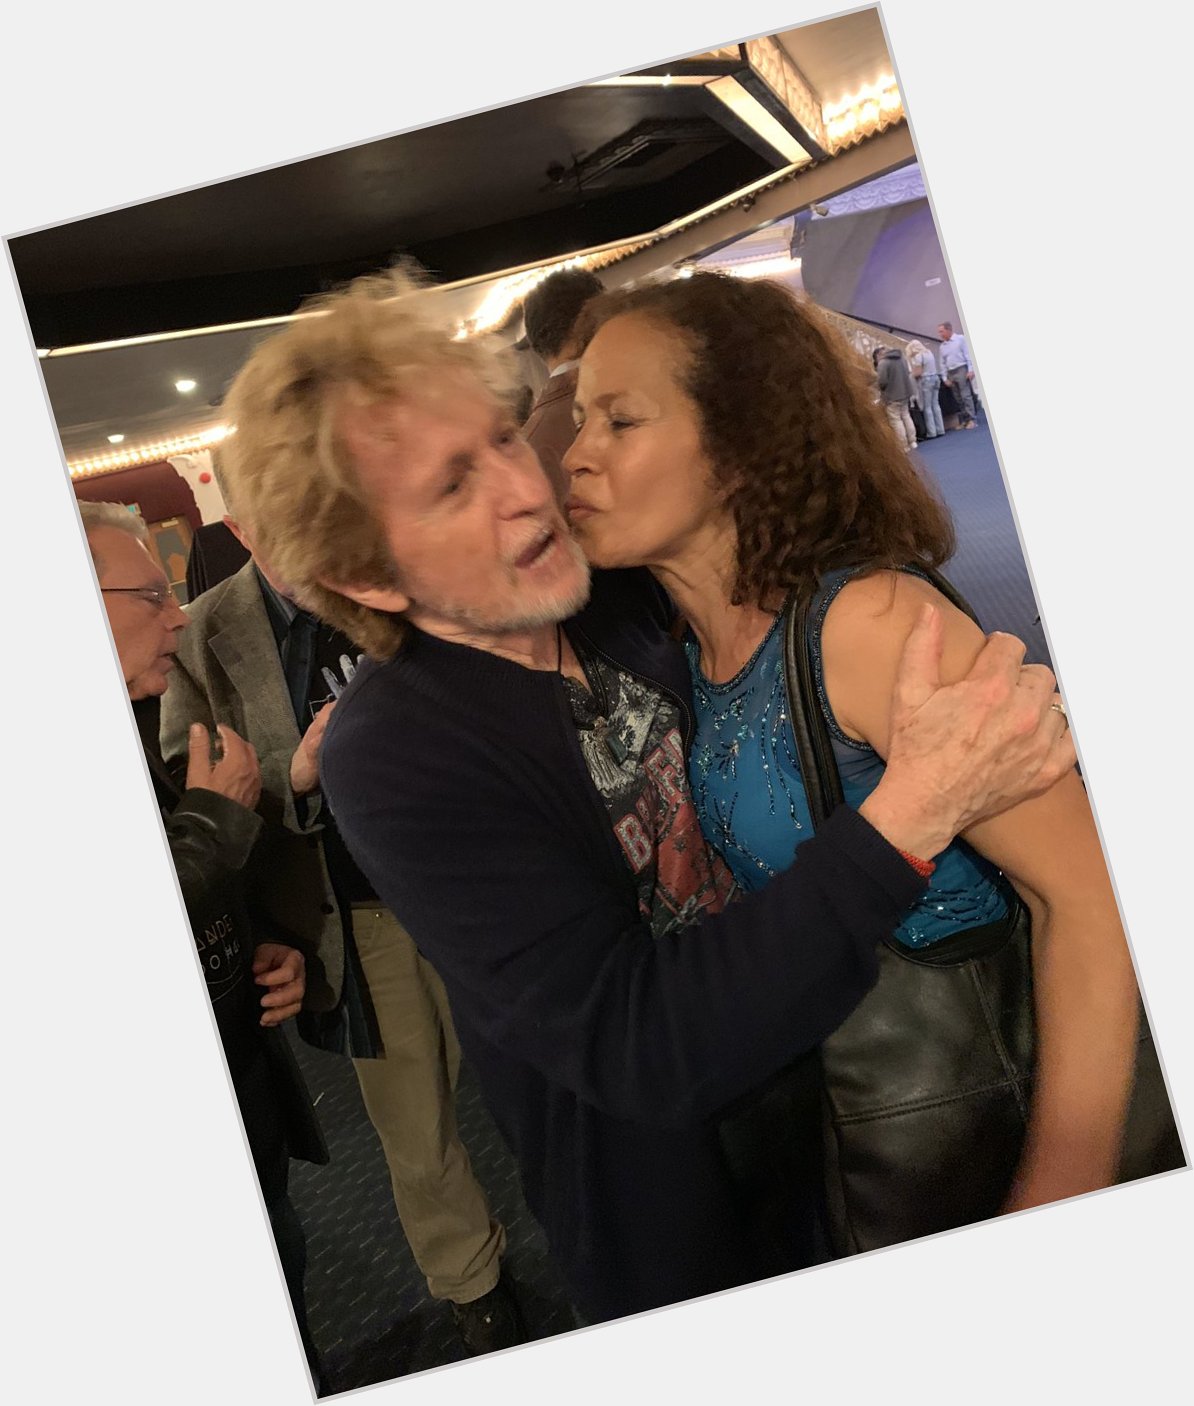  Happy birthday Jon Anderson! My regards to you beautiful wife. Are you in SLO area?    